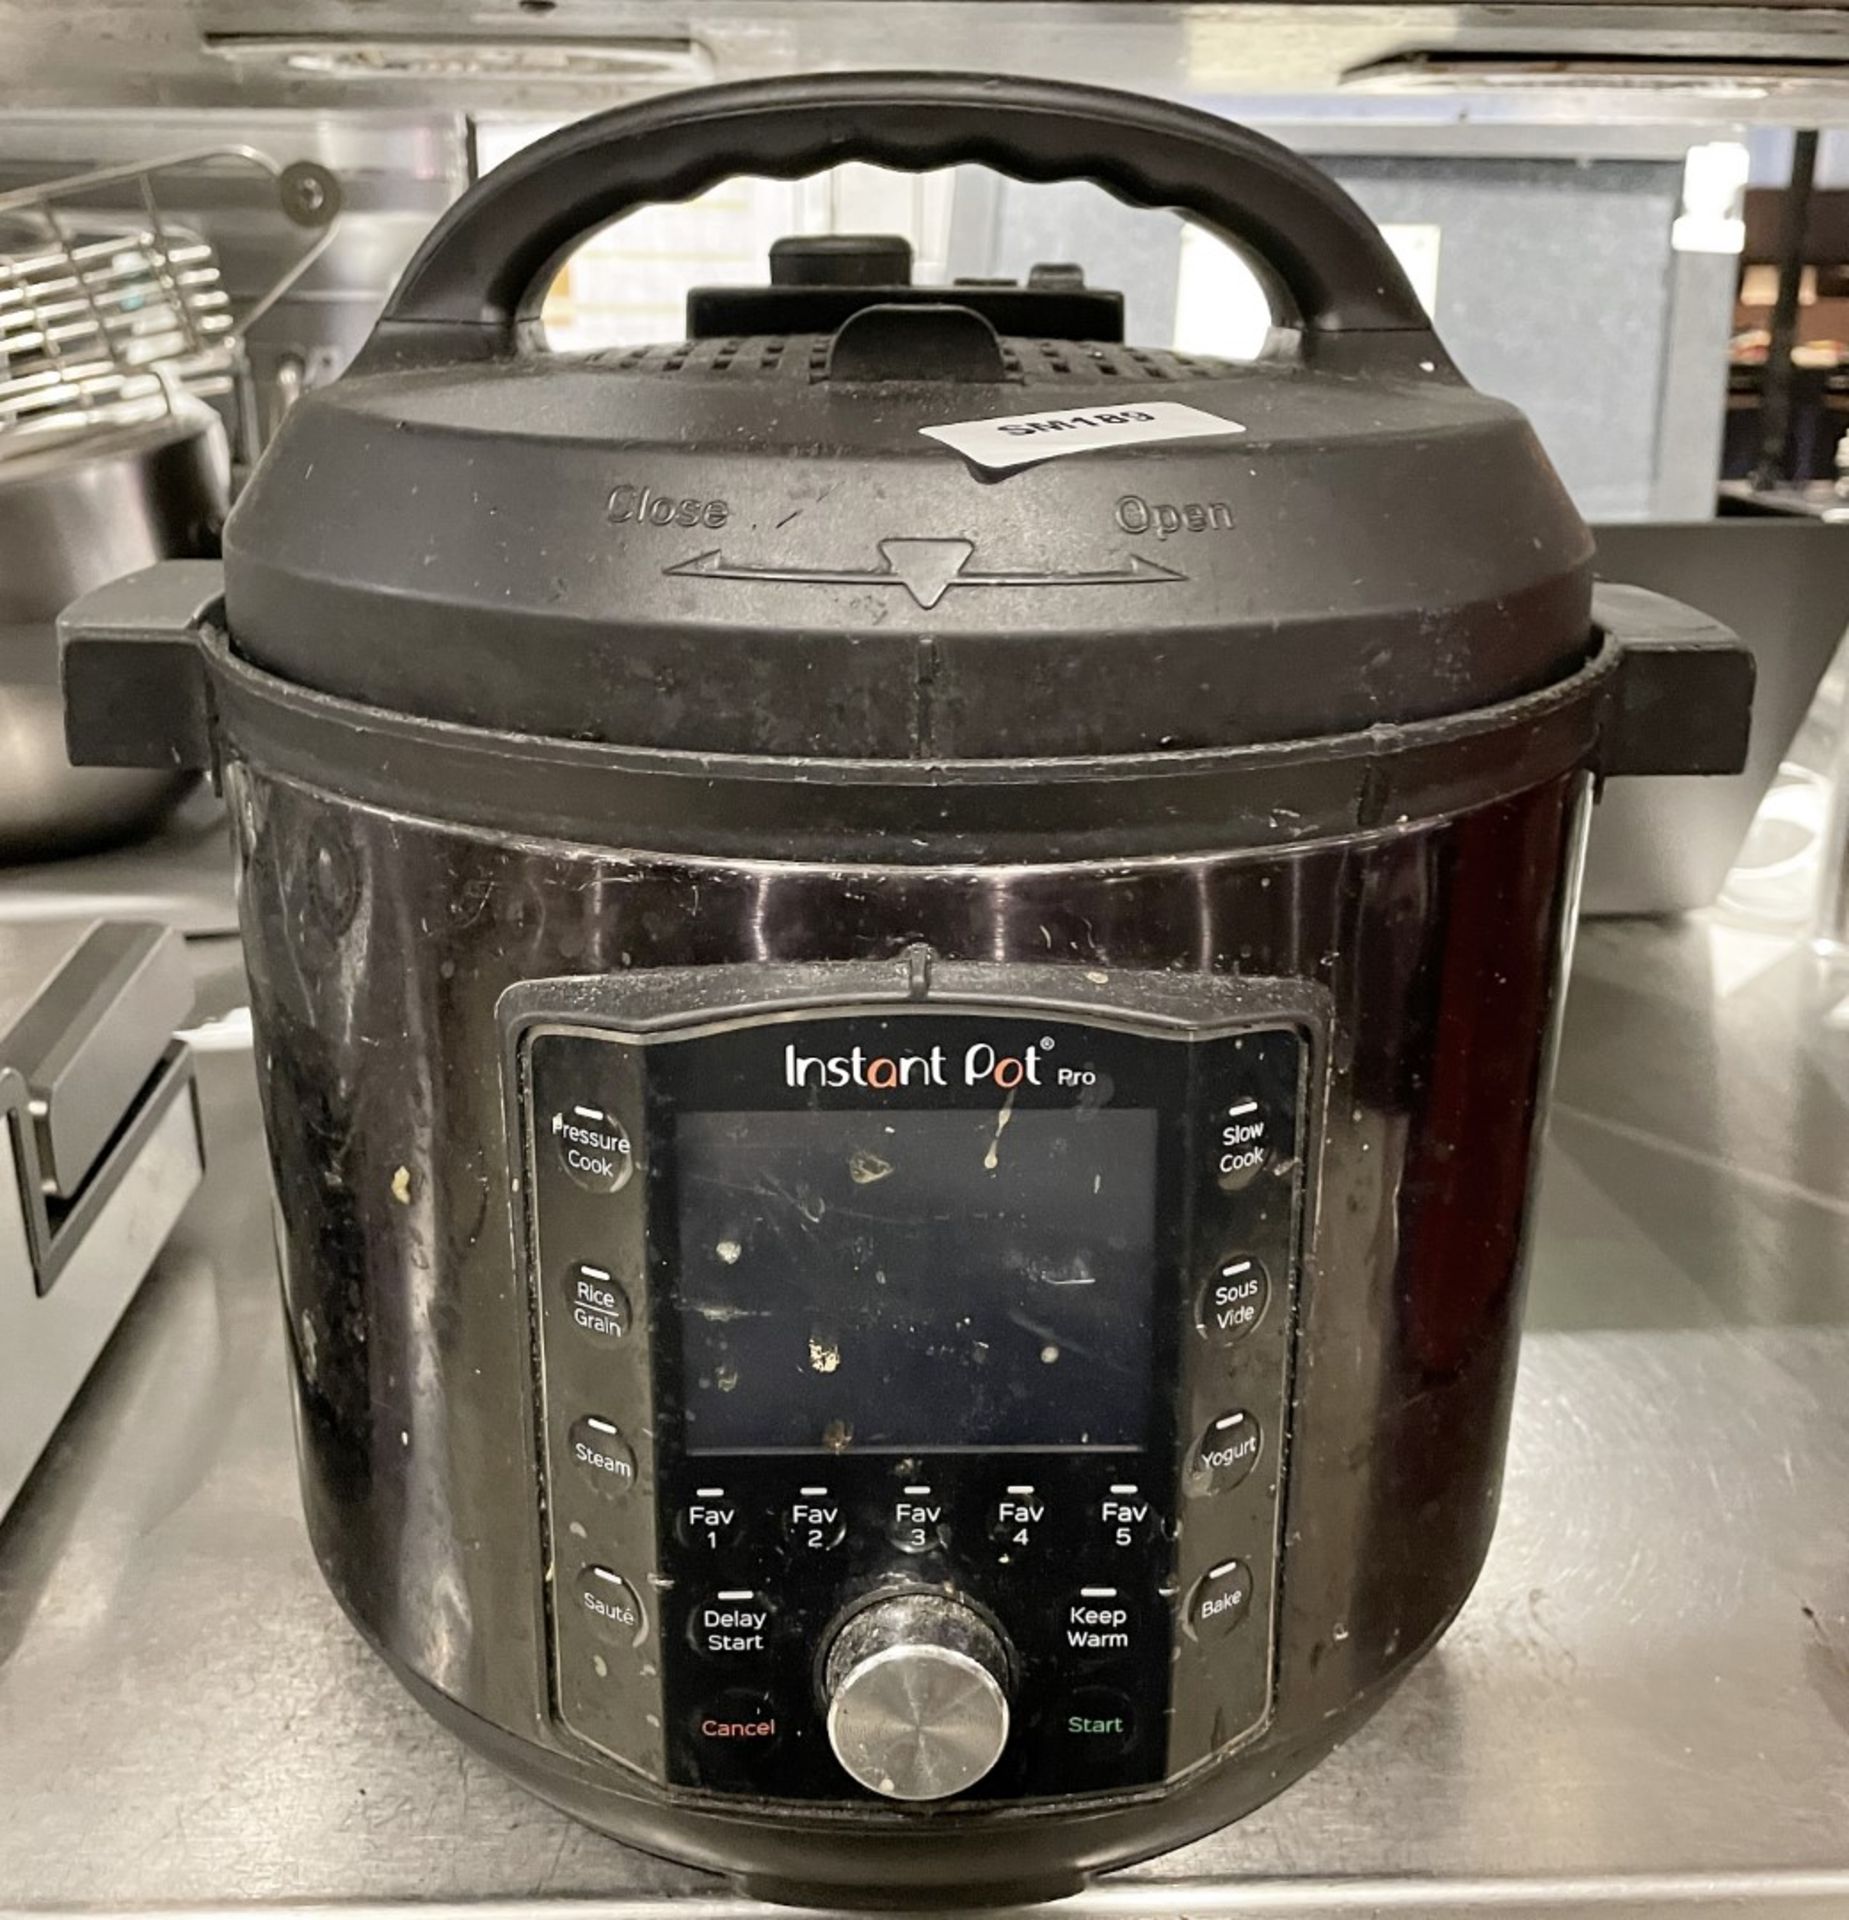 1 x Instat Pot Pro 60 10 in 1 Multi Cooker - 5.7L - Features Include Slow Cooker, Sous Vide, Saute - Image 2 of 6